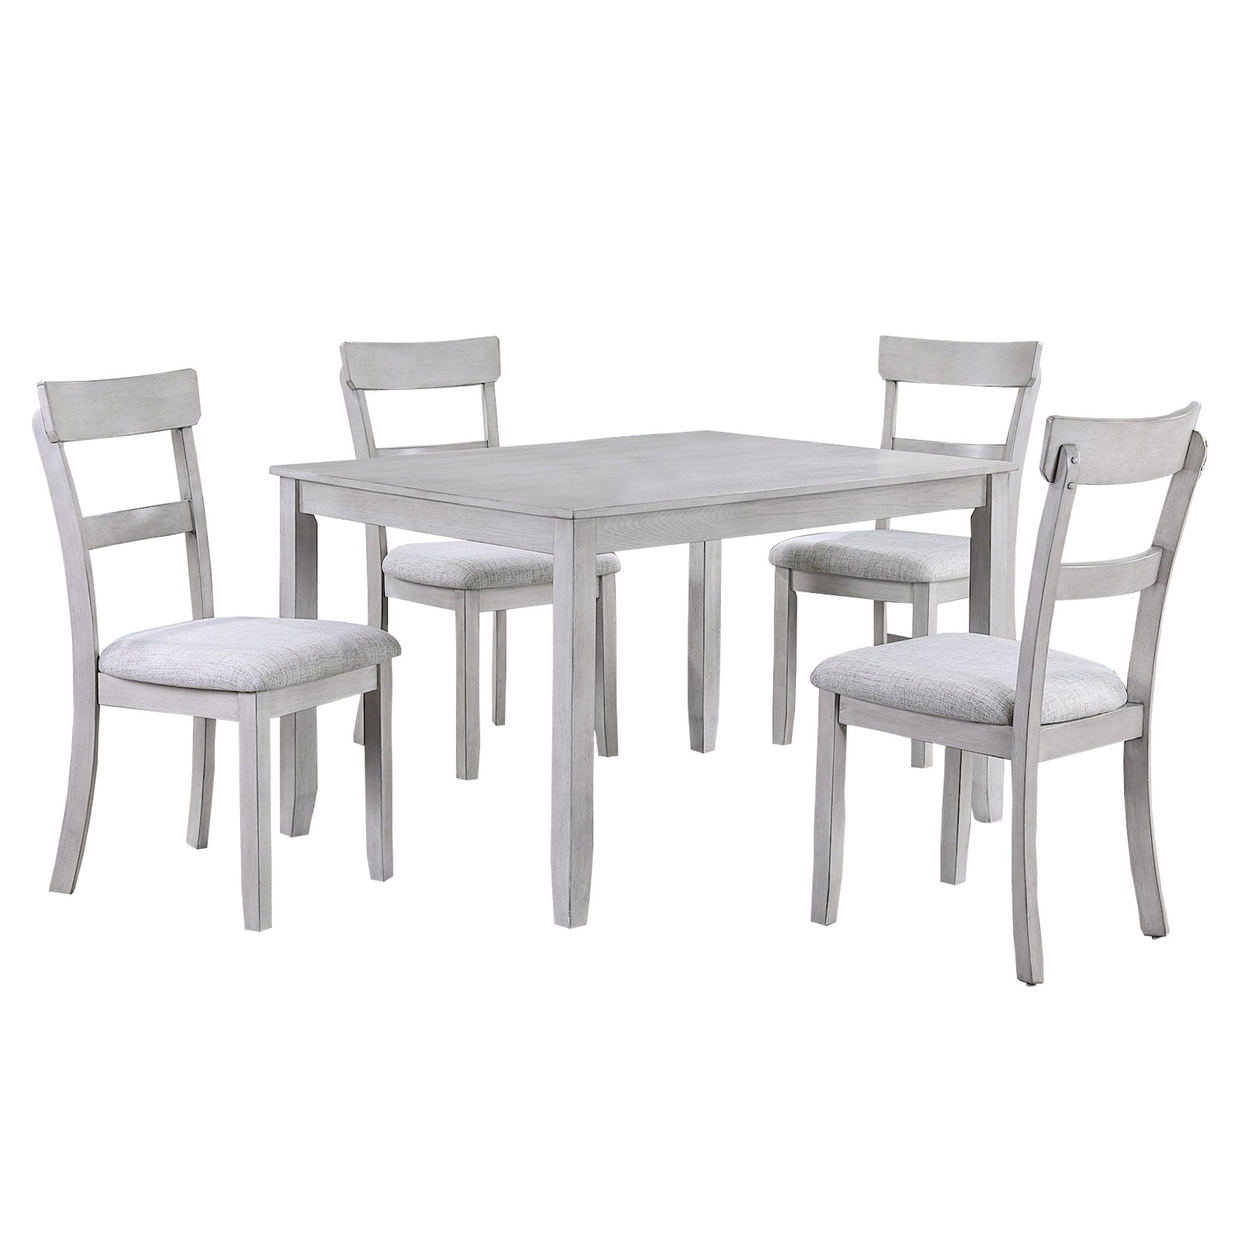 Charlotte 5 Piece Dining Table And Chairs Set, Wood, Farmhouse, White -Saltoro Sherpi